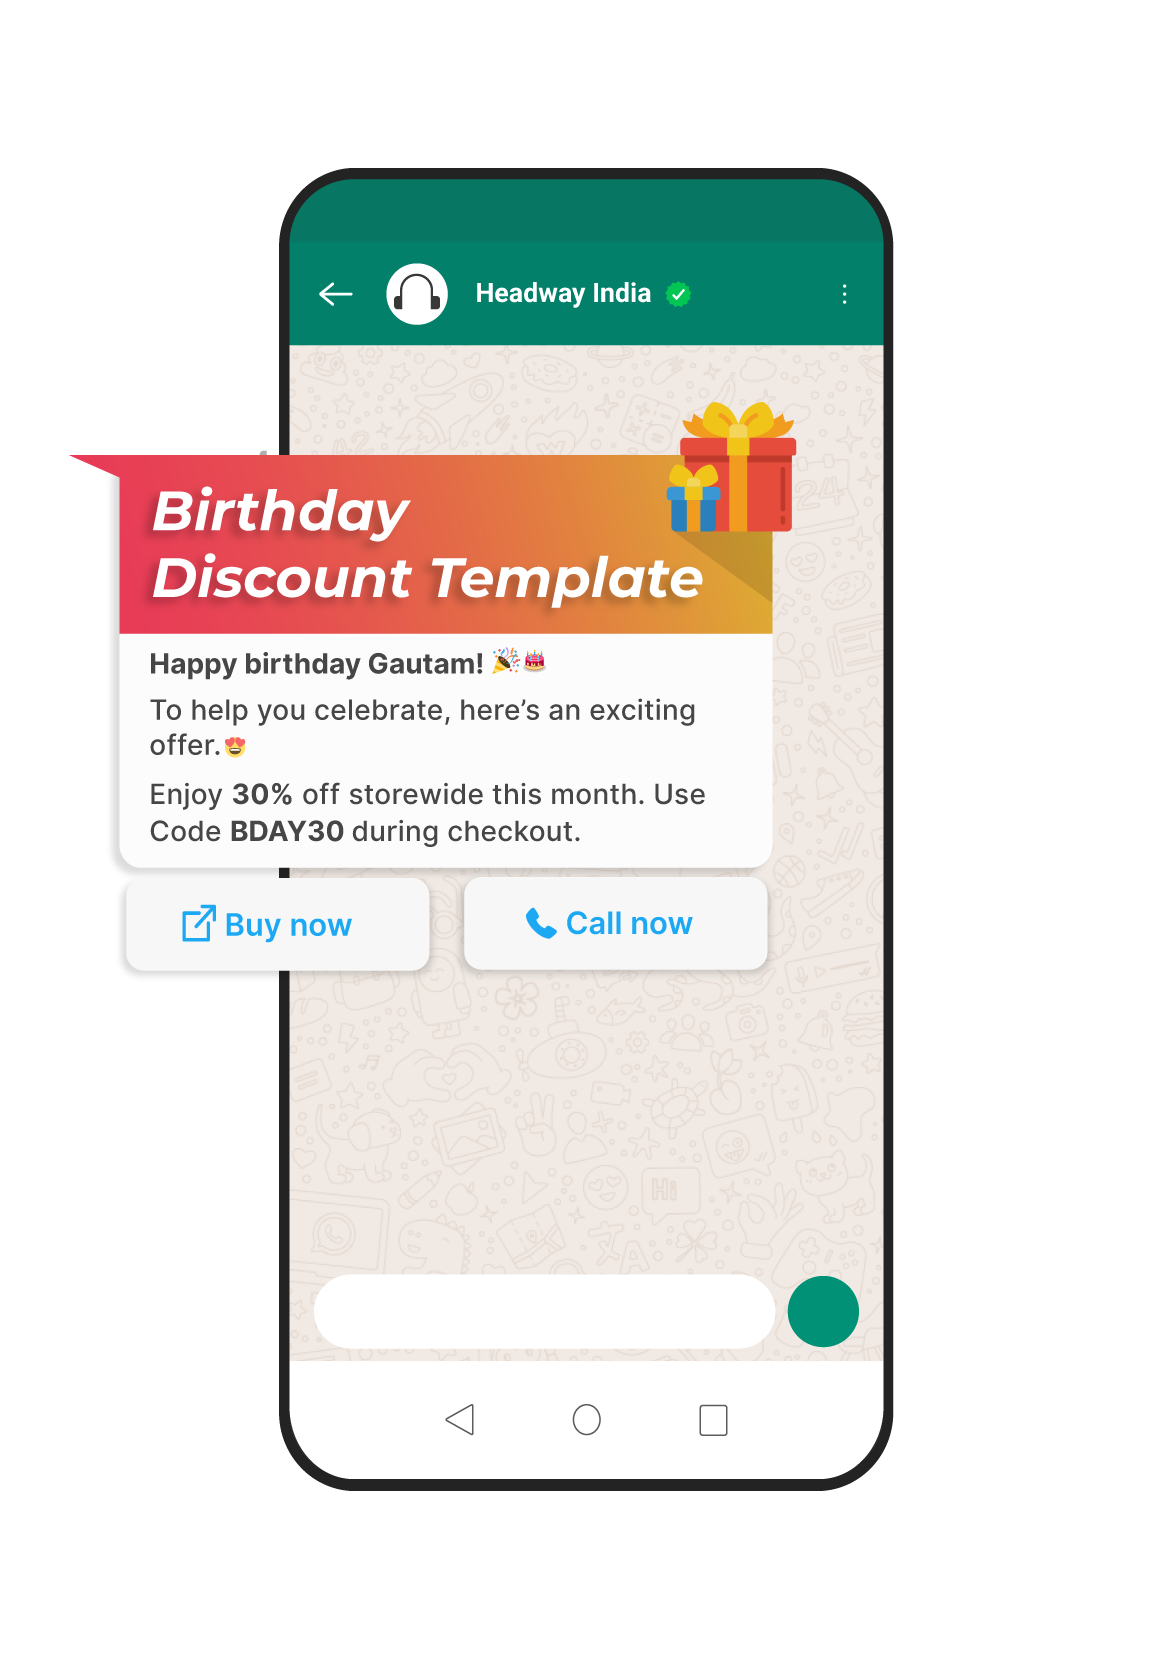 Birthday discount template